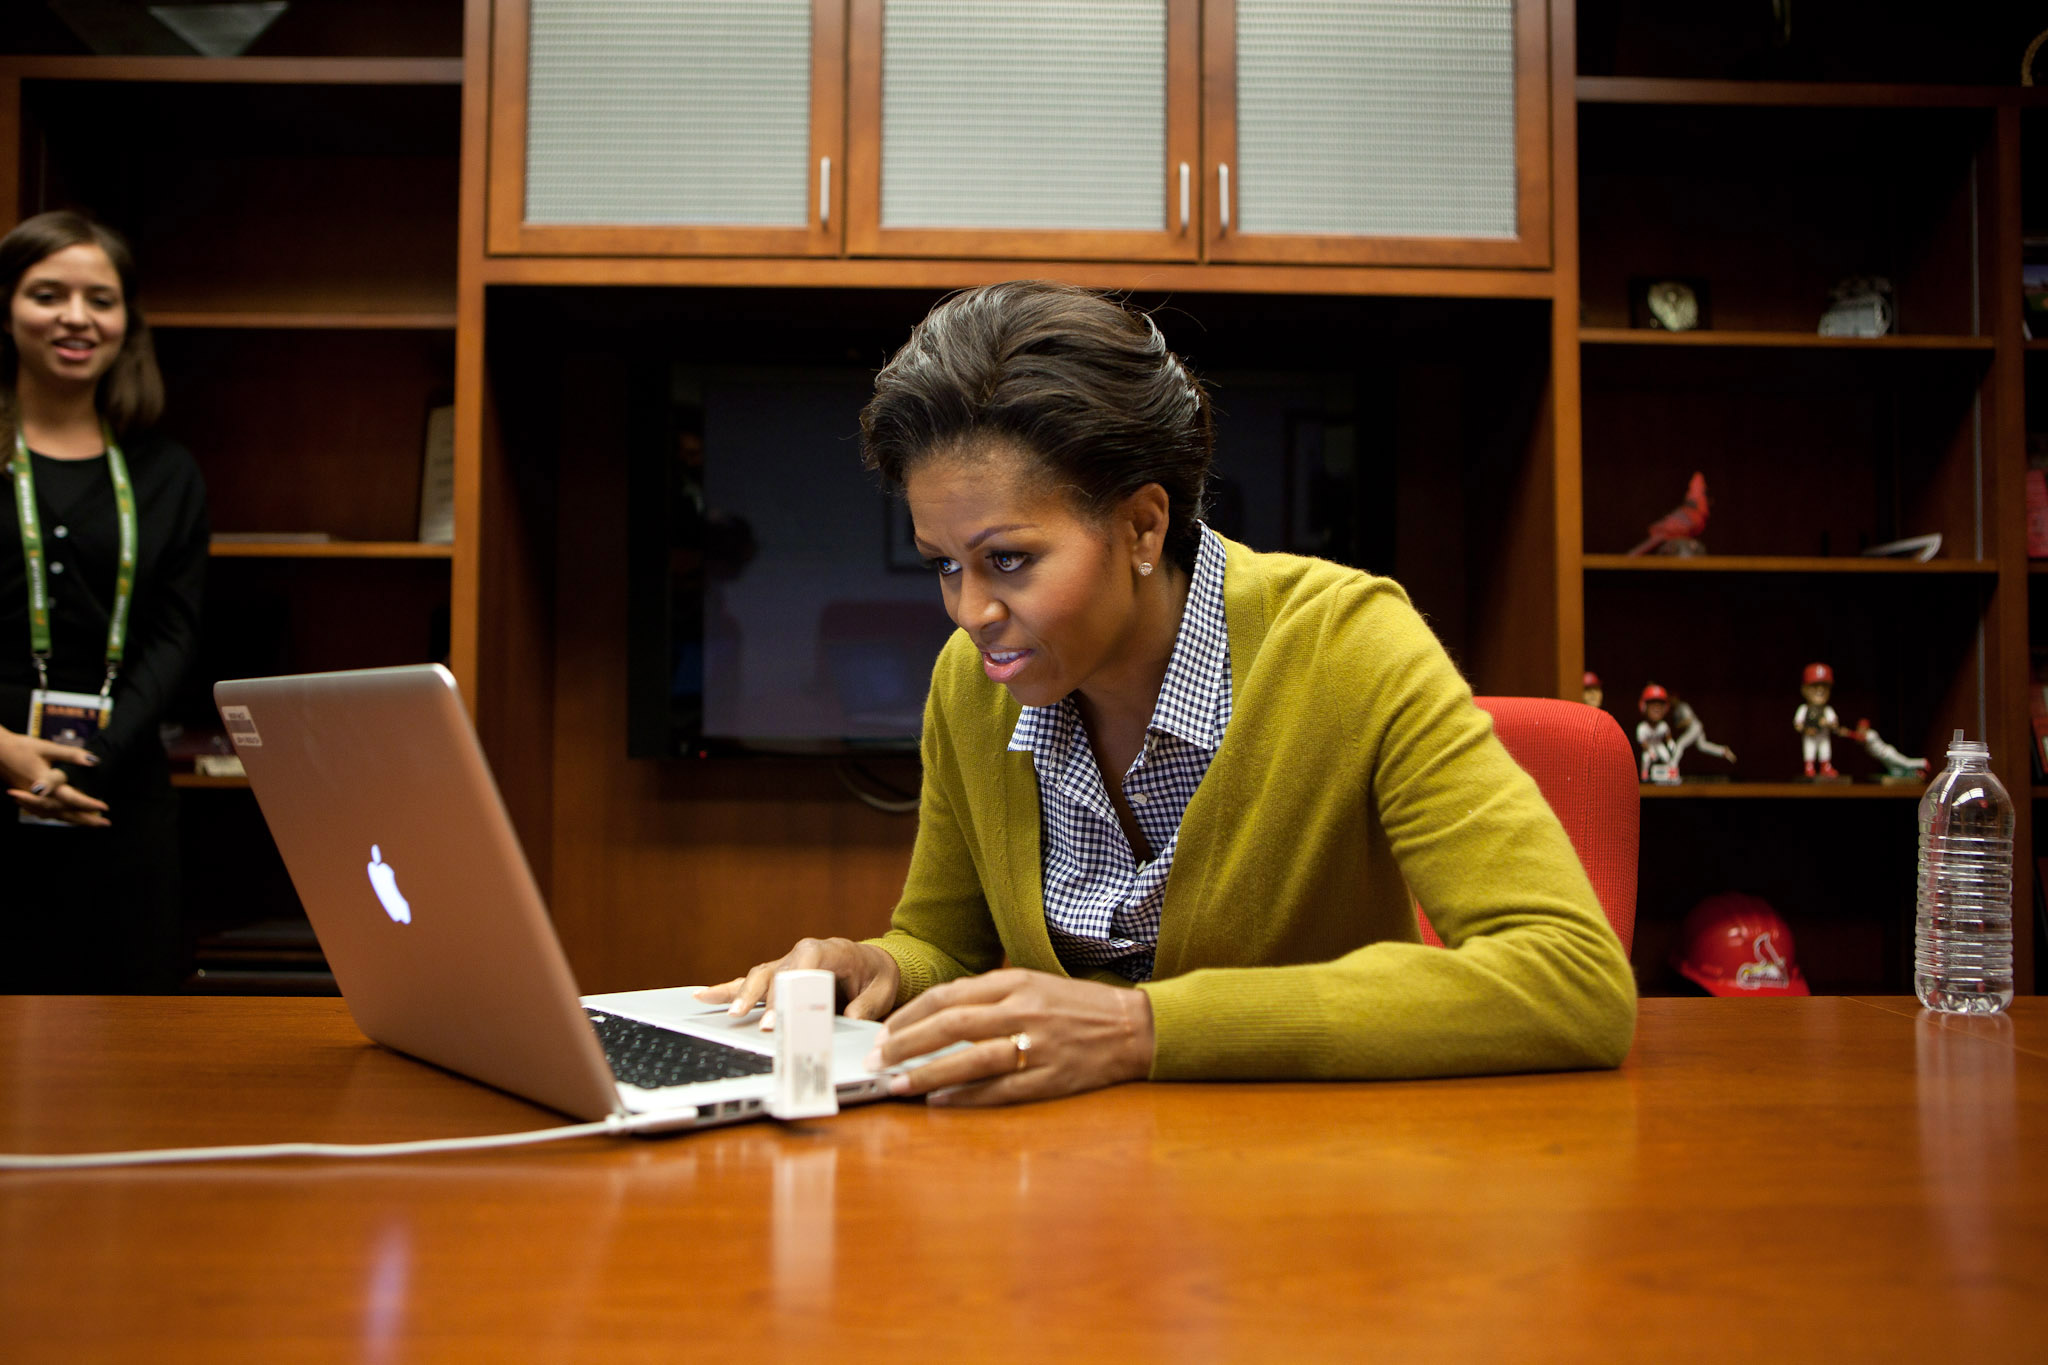 The First Lady makes her first official tweet at Game 1 of the World Series